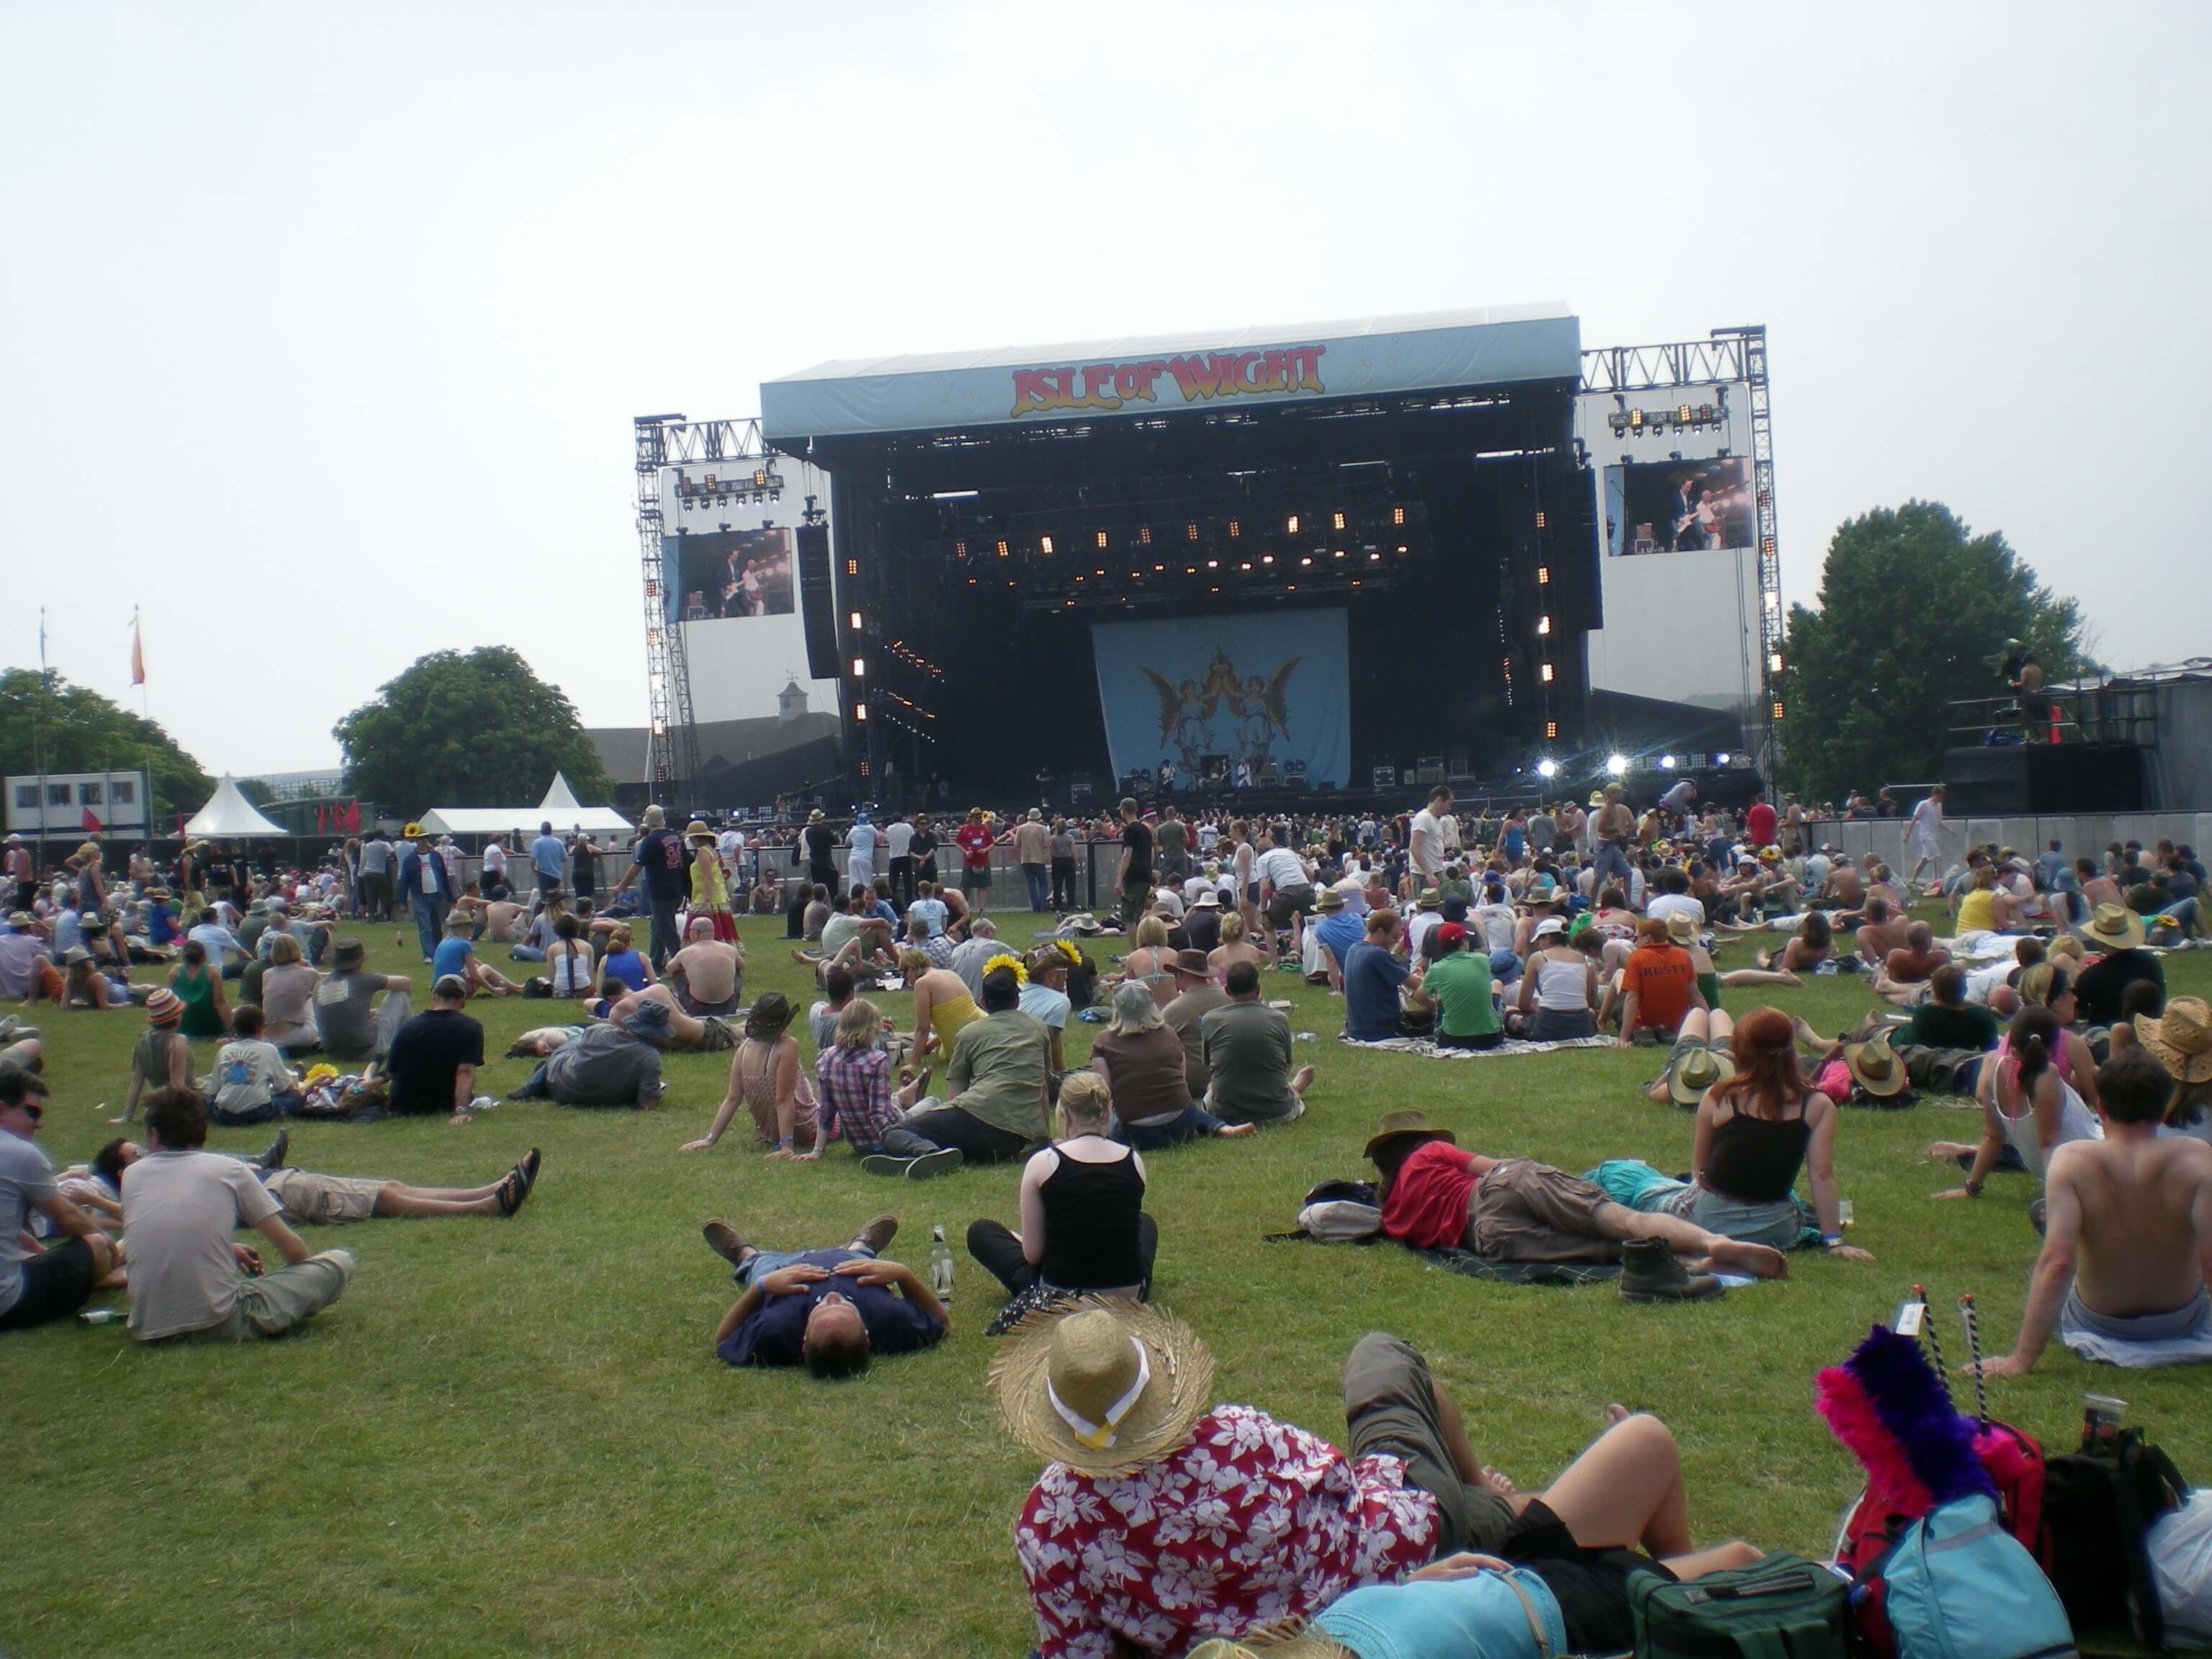 Photograph of the Isle of Wight Festival